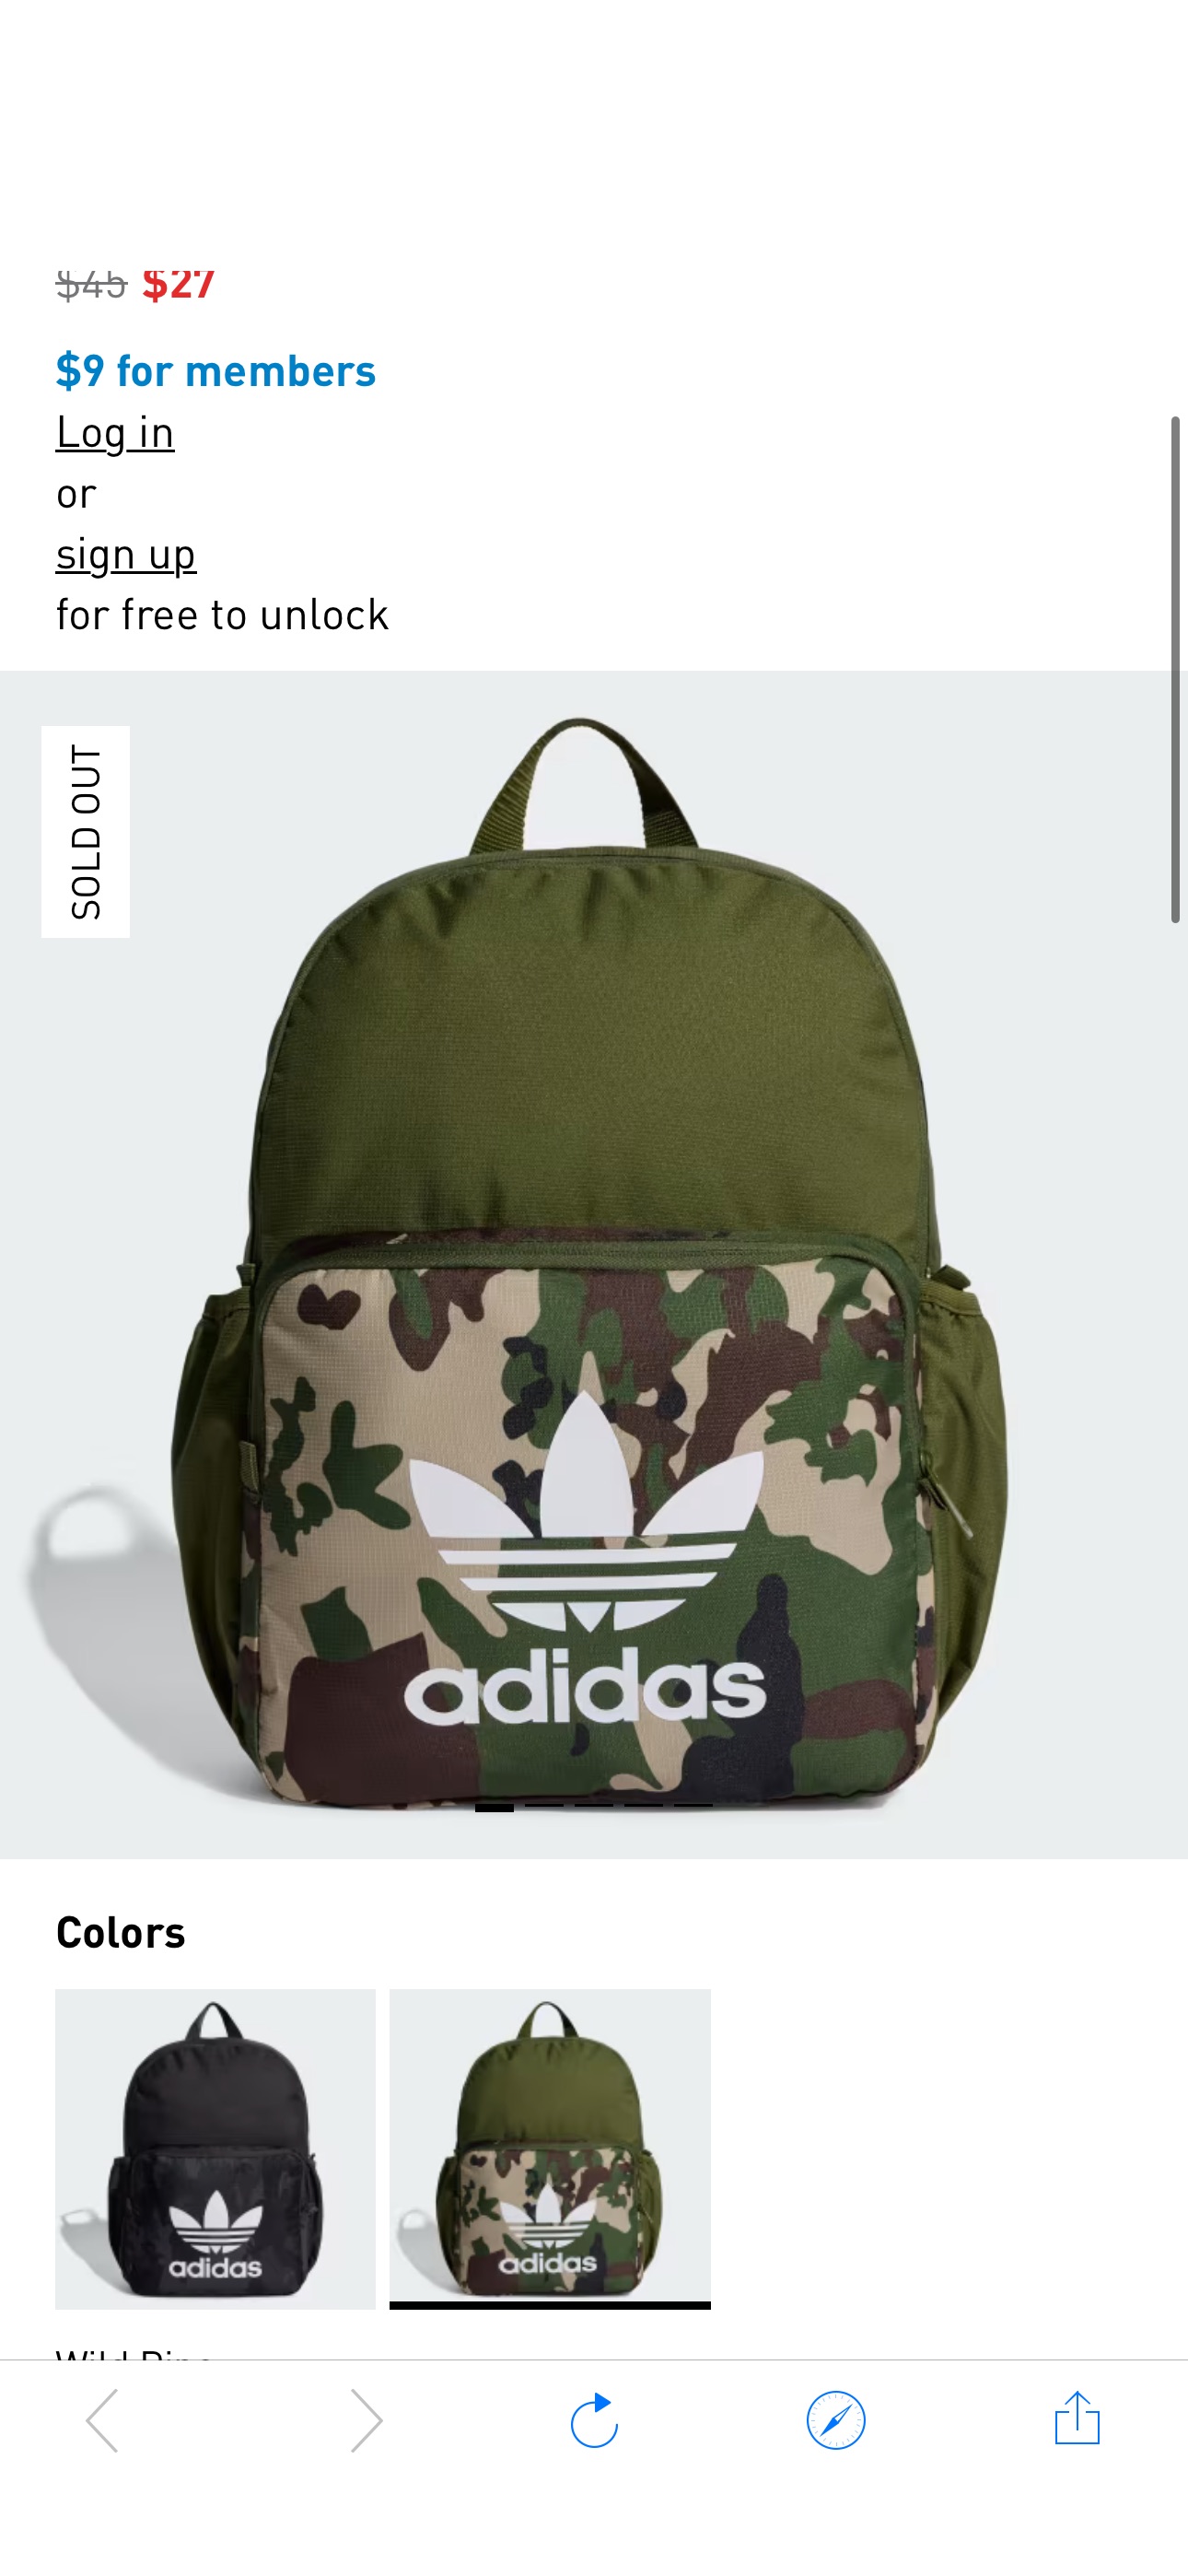 adidas Camo Graphics Backpack - Green | Unisex Lifestyle | adidas US $7 Reg. $45 Adidas CAMO GRAPHICS BACKPACK
Log in and use code OFF15